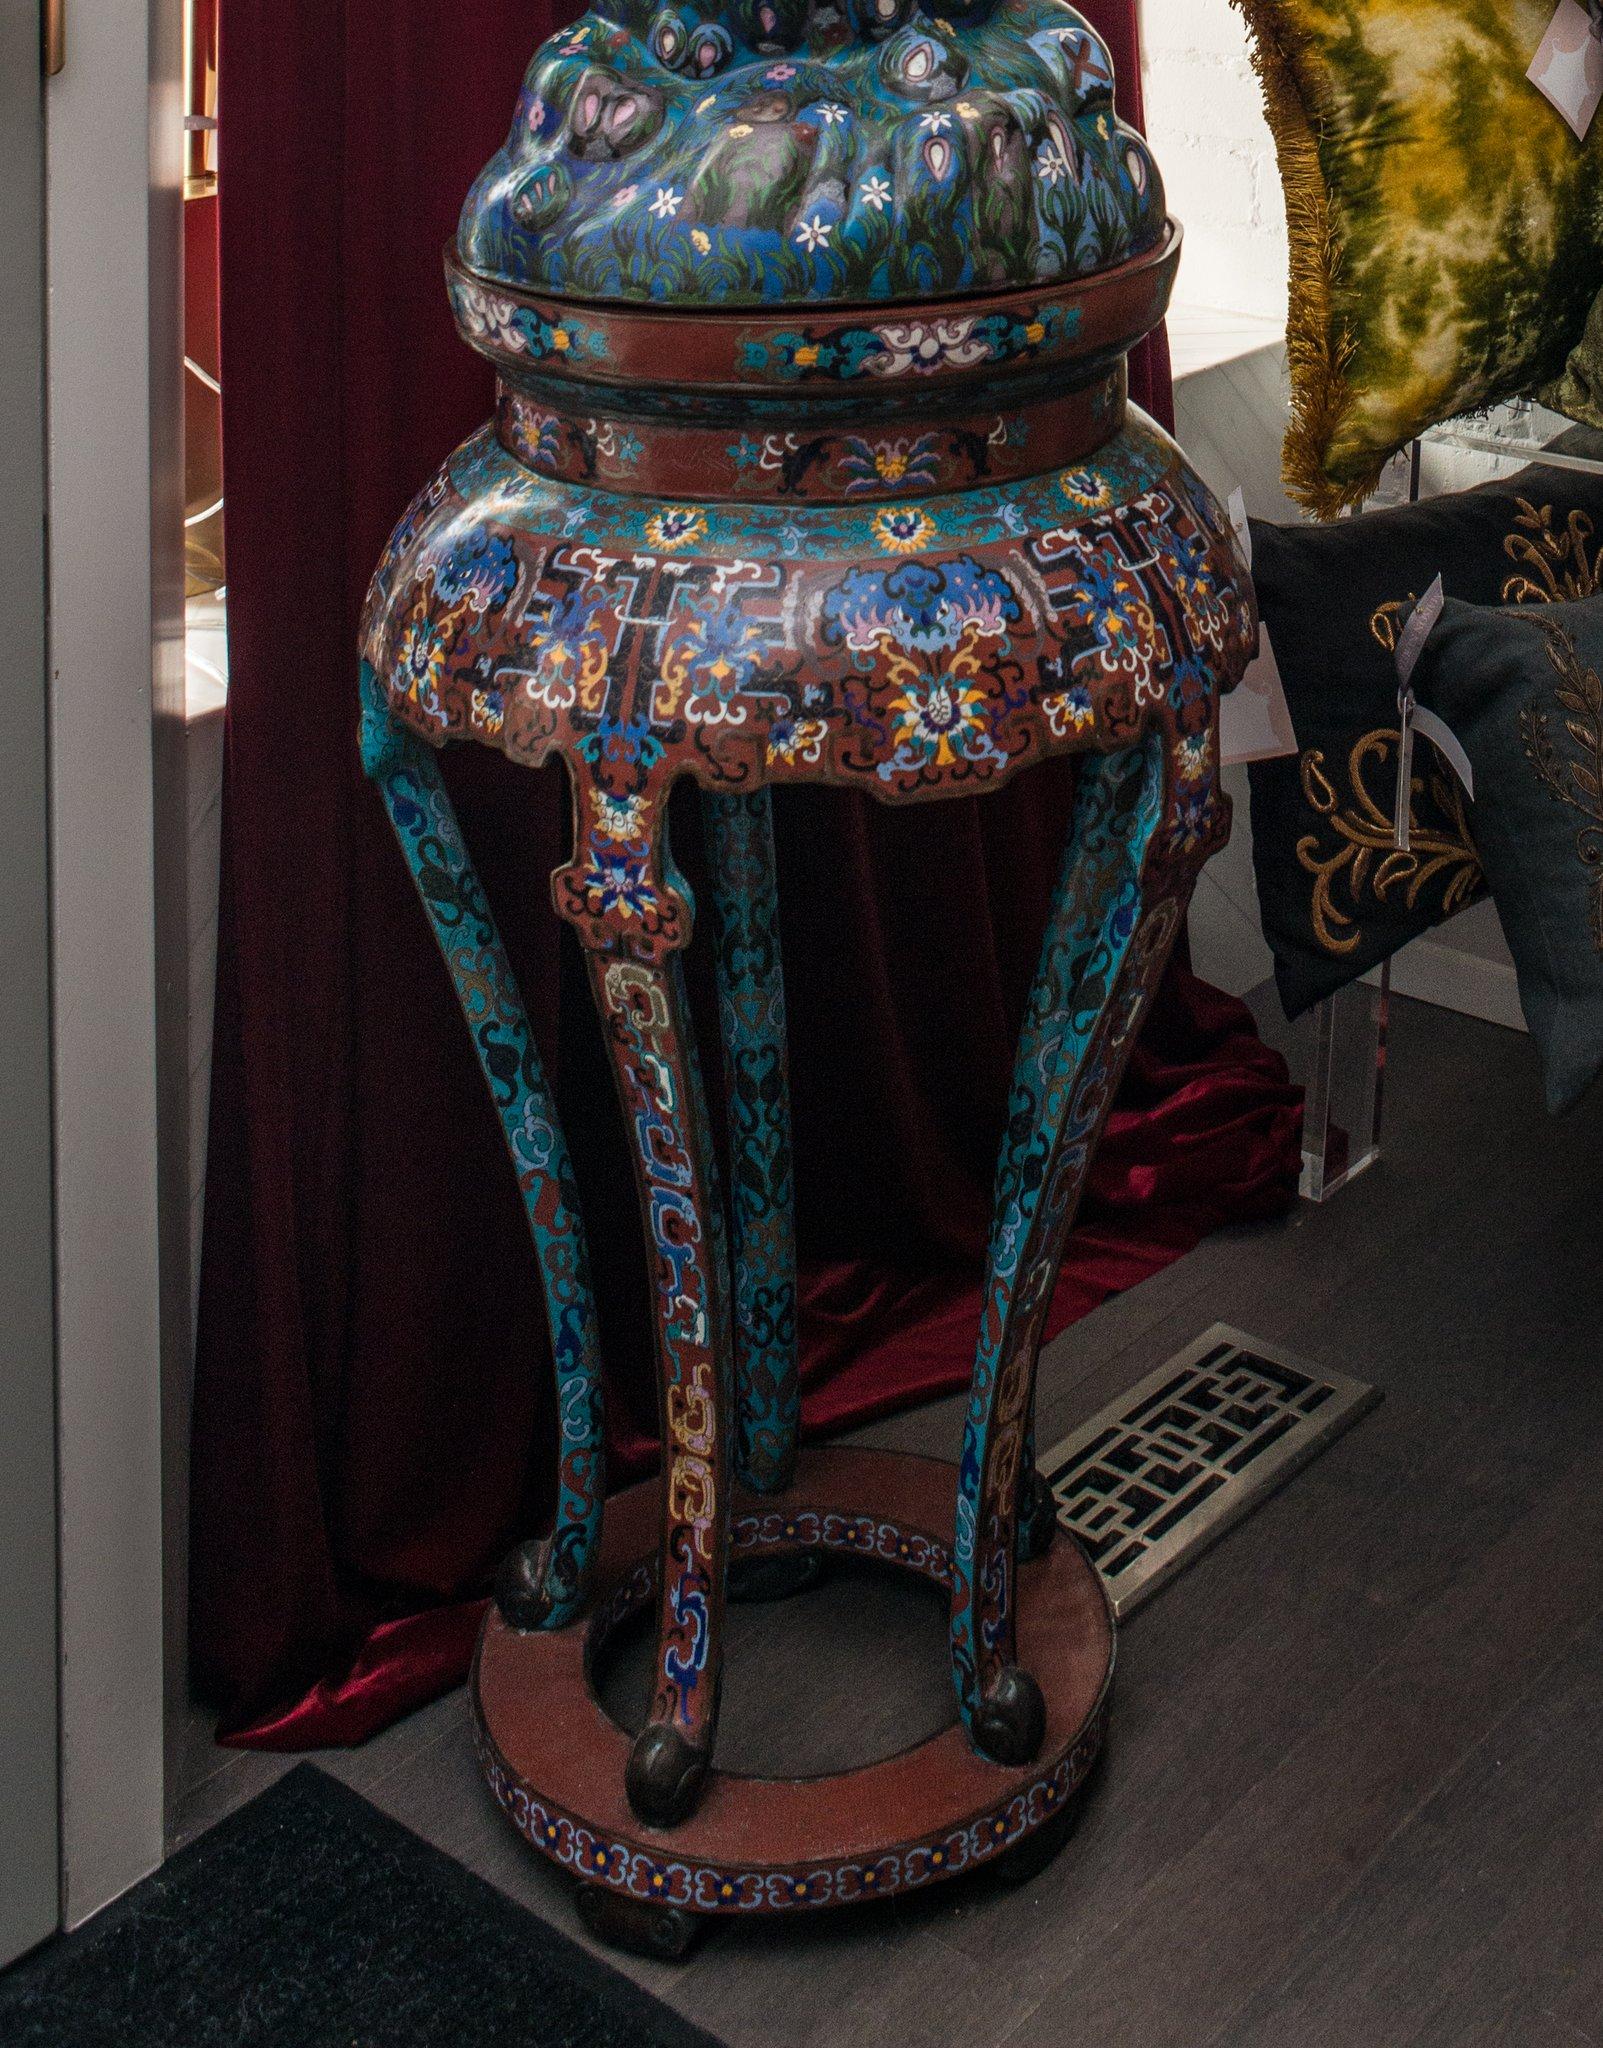 These rare tables have a spectacular presence due to their grand size and intricate work. Cloisonné, derived from the French word “enclosed” is an ancient technique of decorating metalwork objects. This technique is done by soldering wires in thin